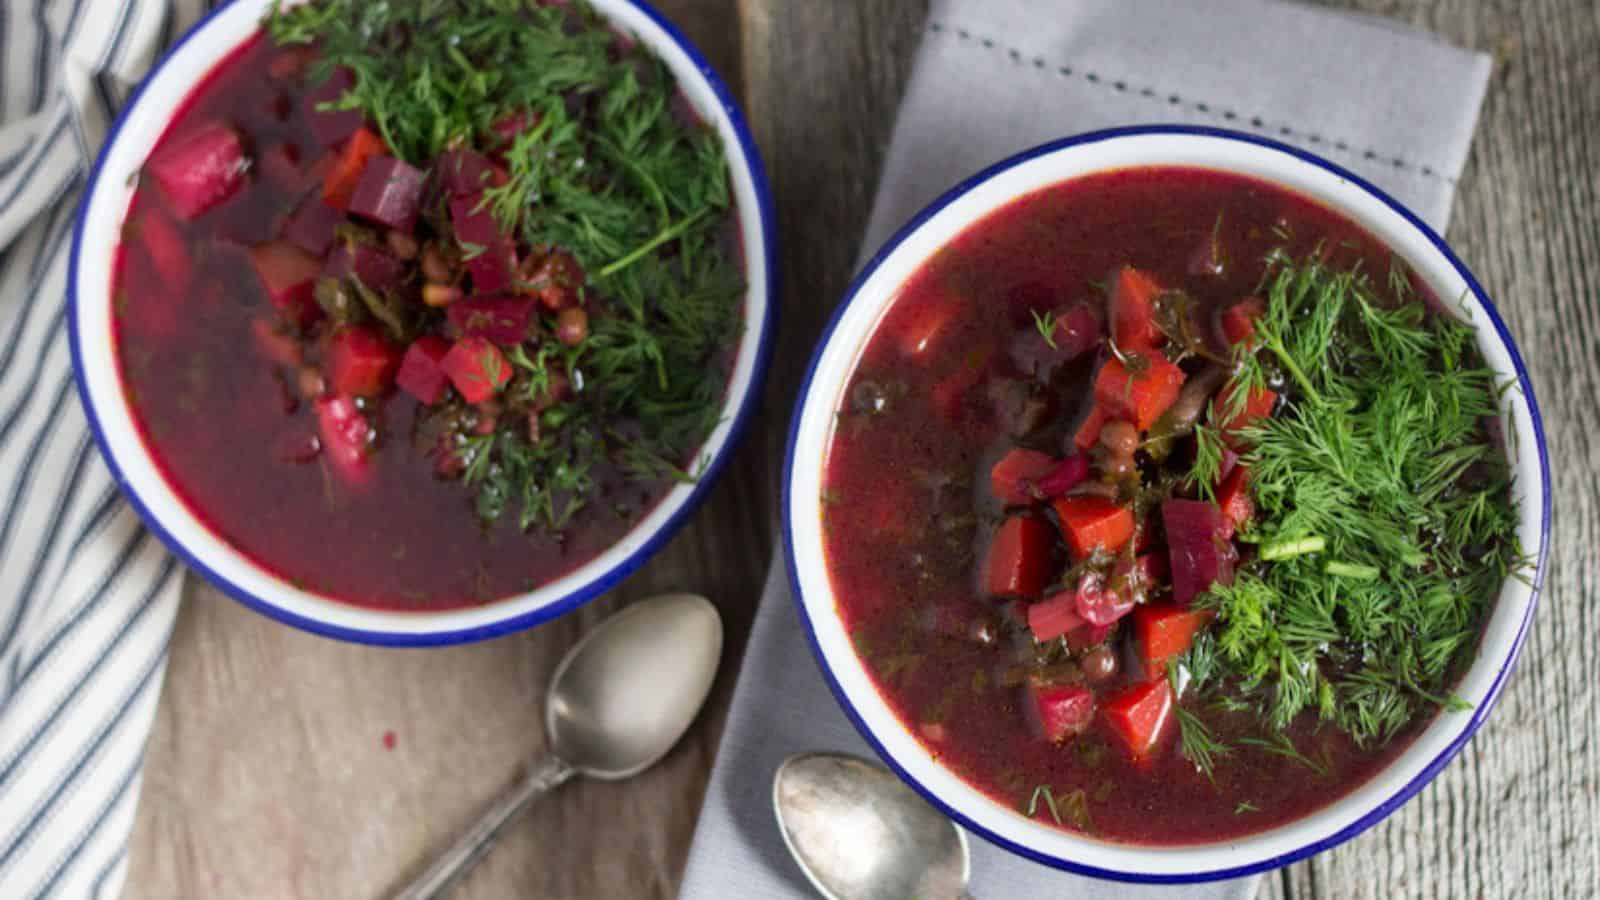 Two bowls of beet soup on a wooden table.